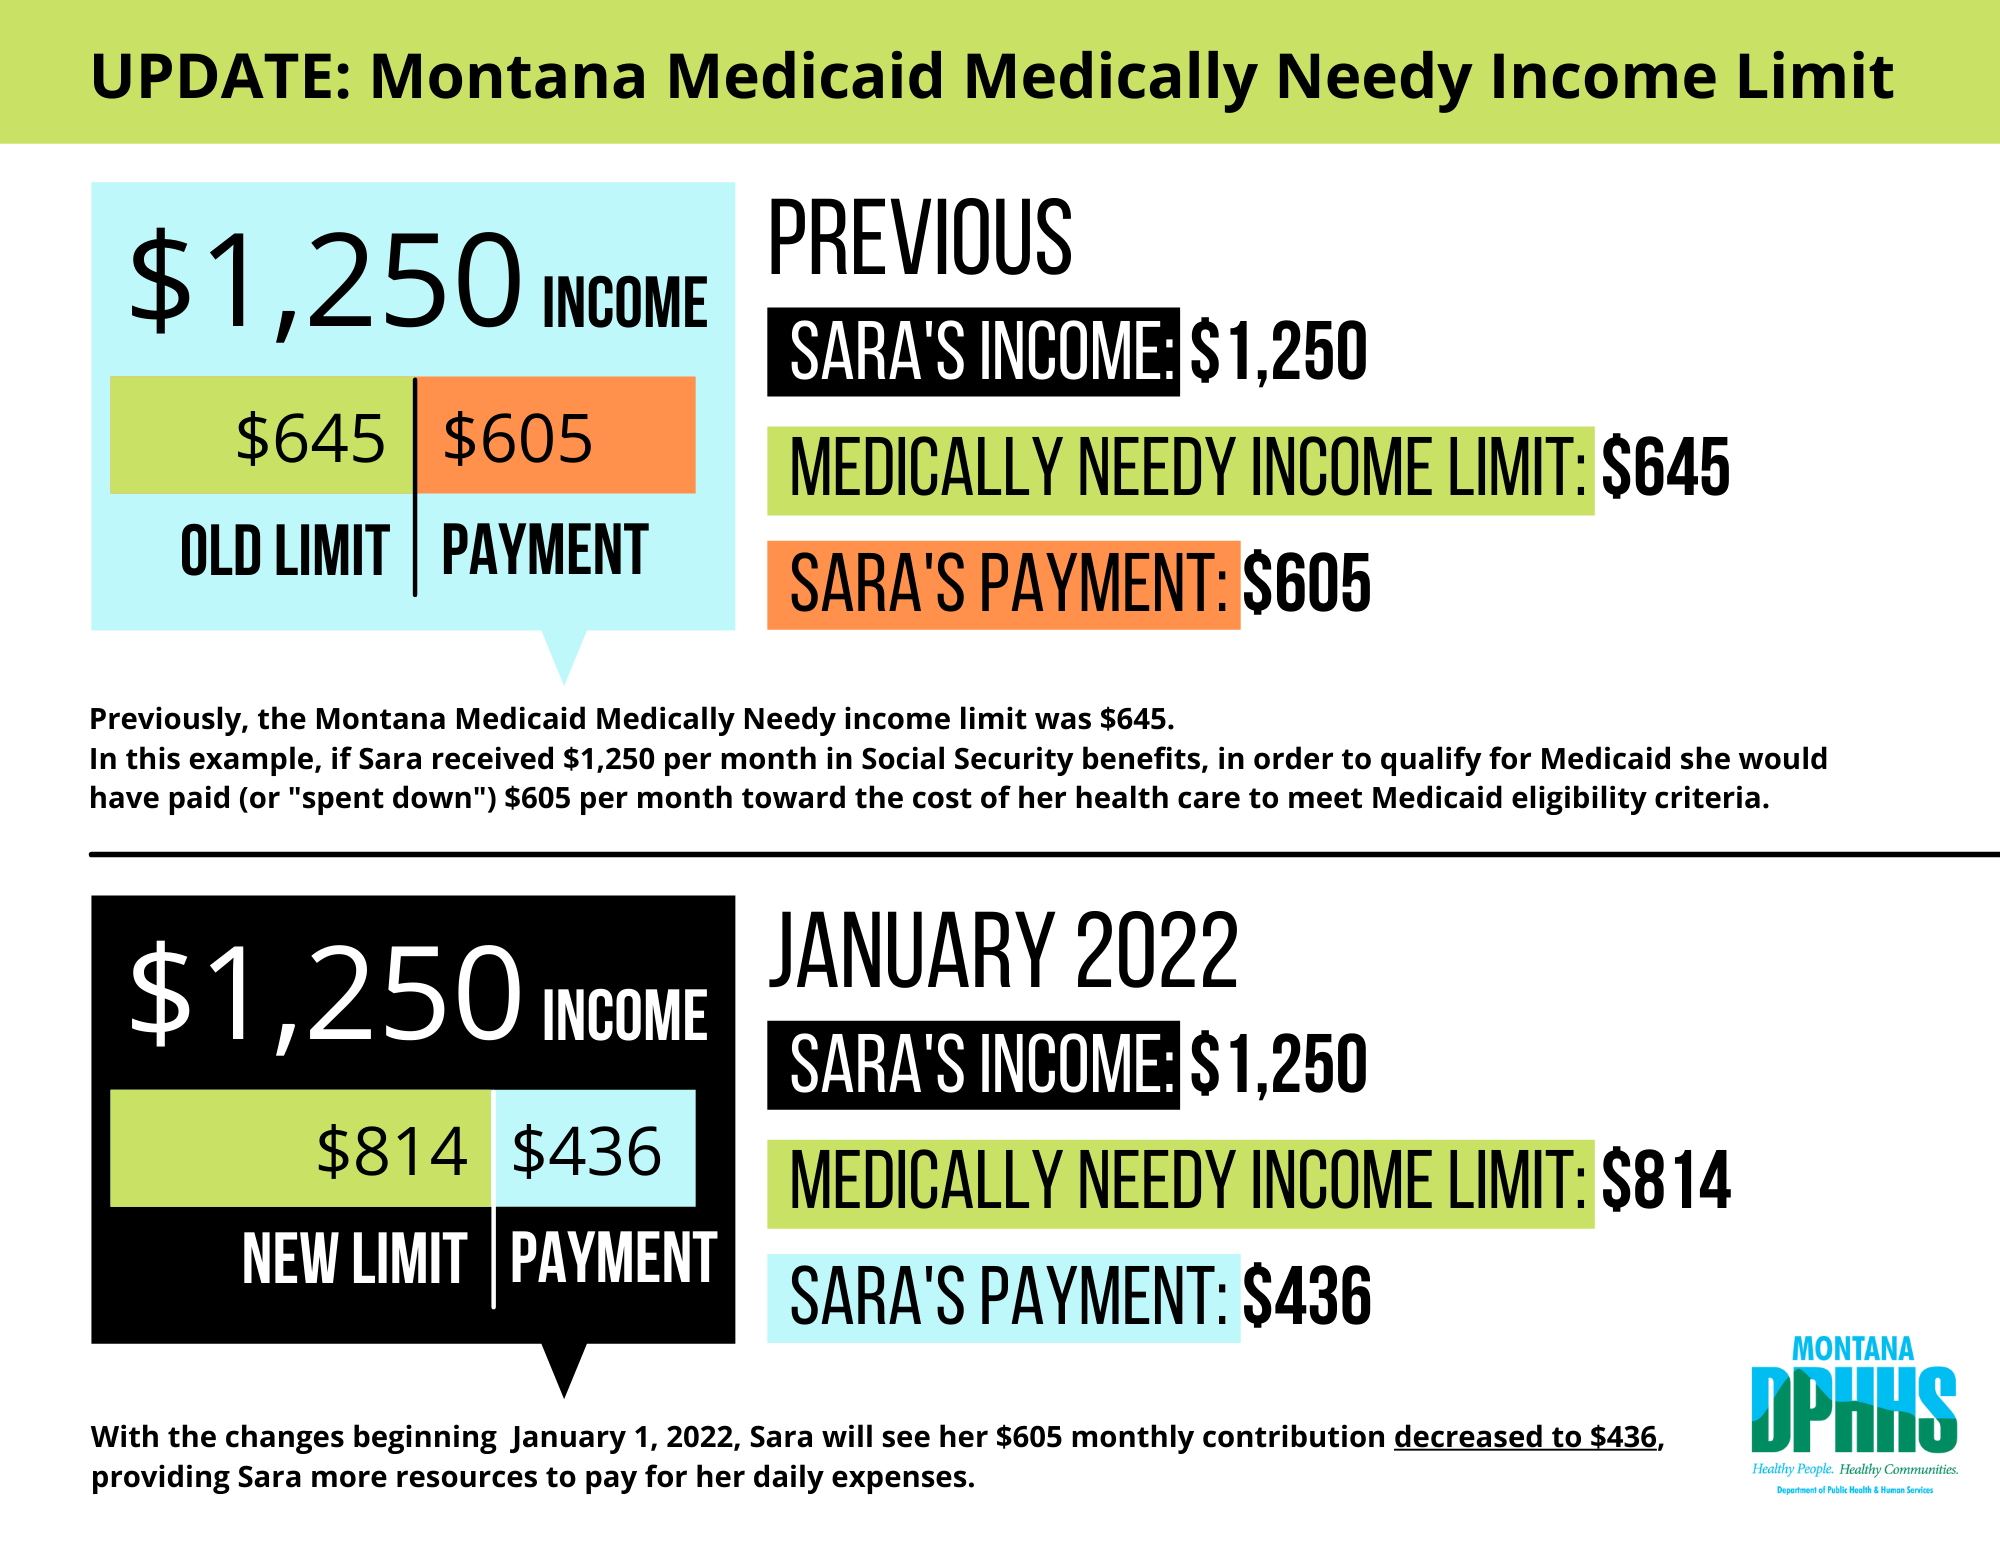 Medically Needy Income Limit example